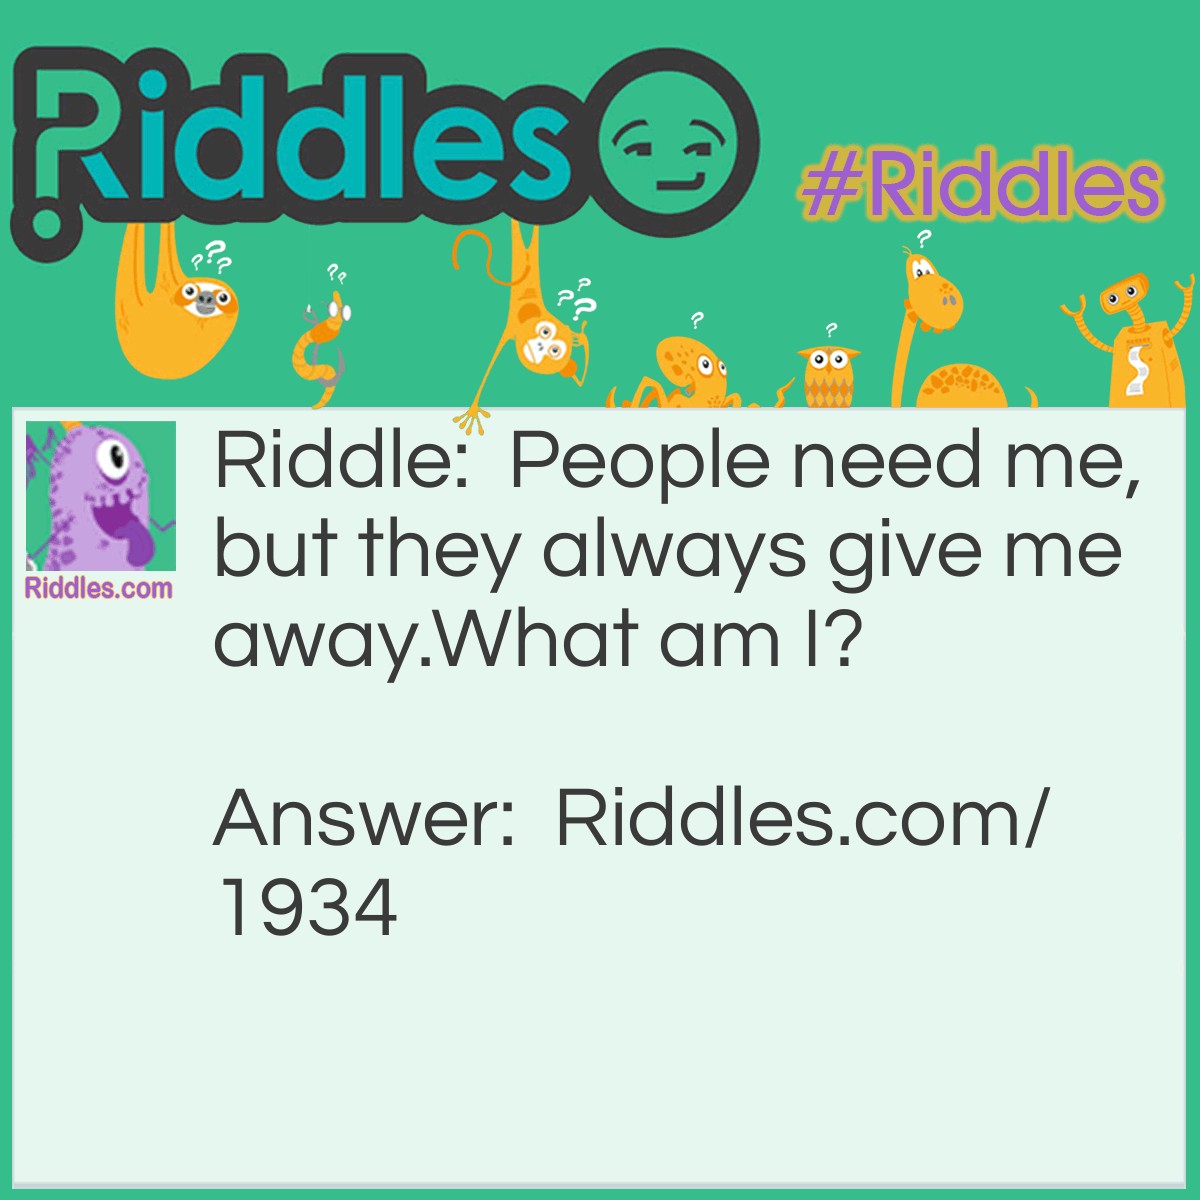 Riddle: People need me, but they always give me away.
What am I? Answer: Money